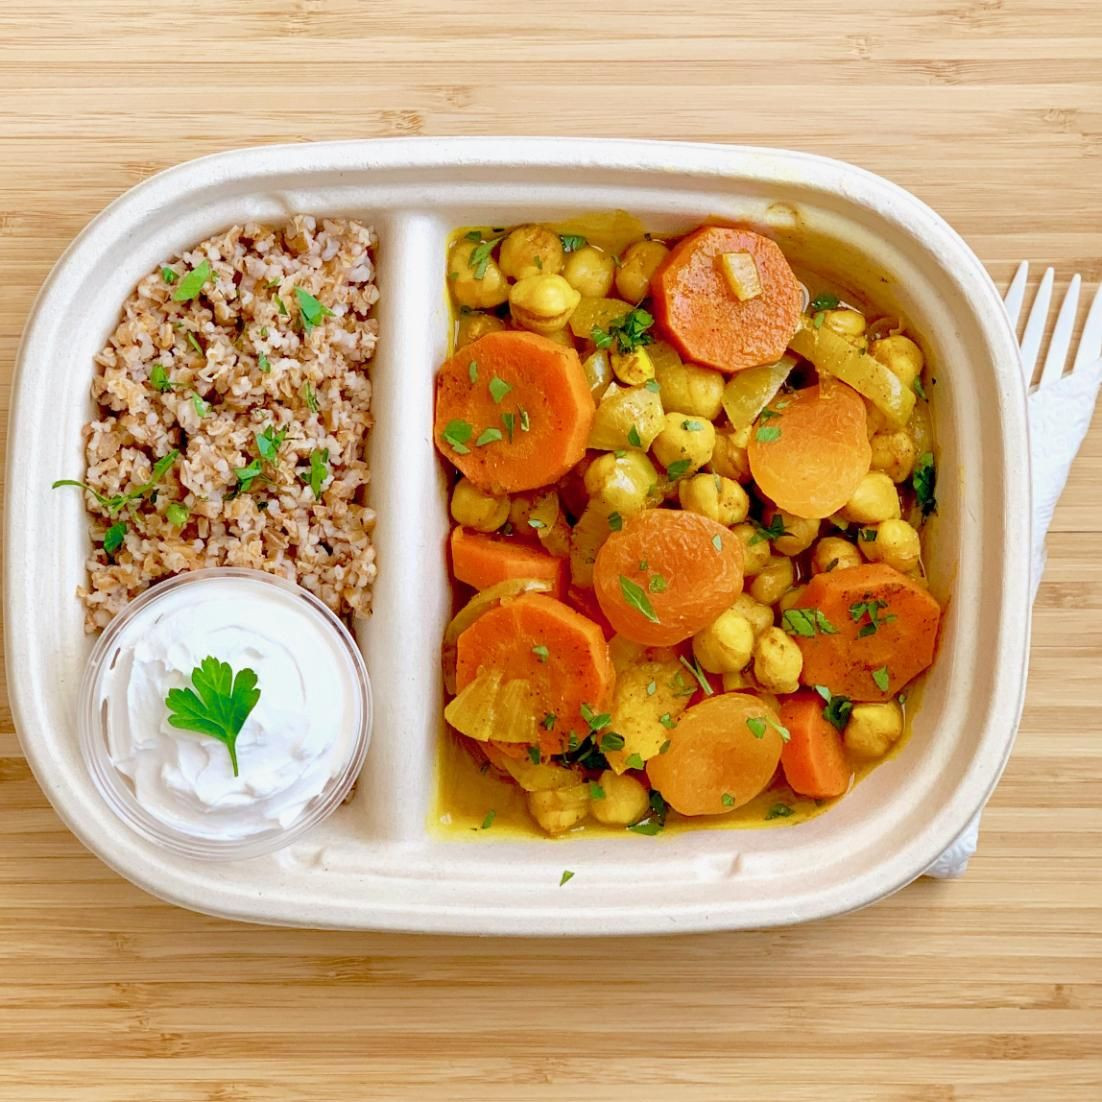 Plant Based Recipes Meal Prep
 Pin by BOYCEMODE on Plant Based Meals in 2019